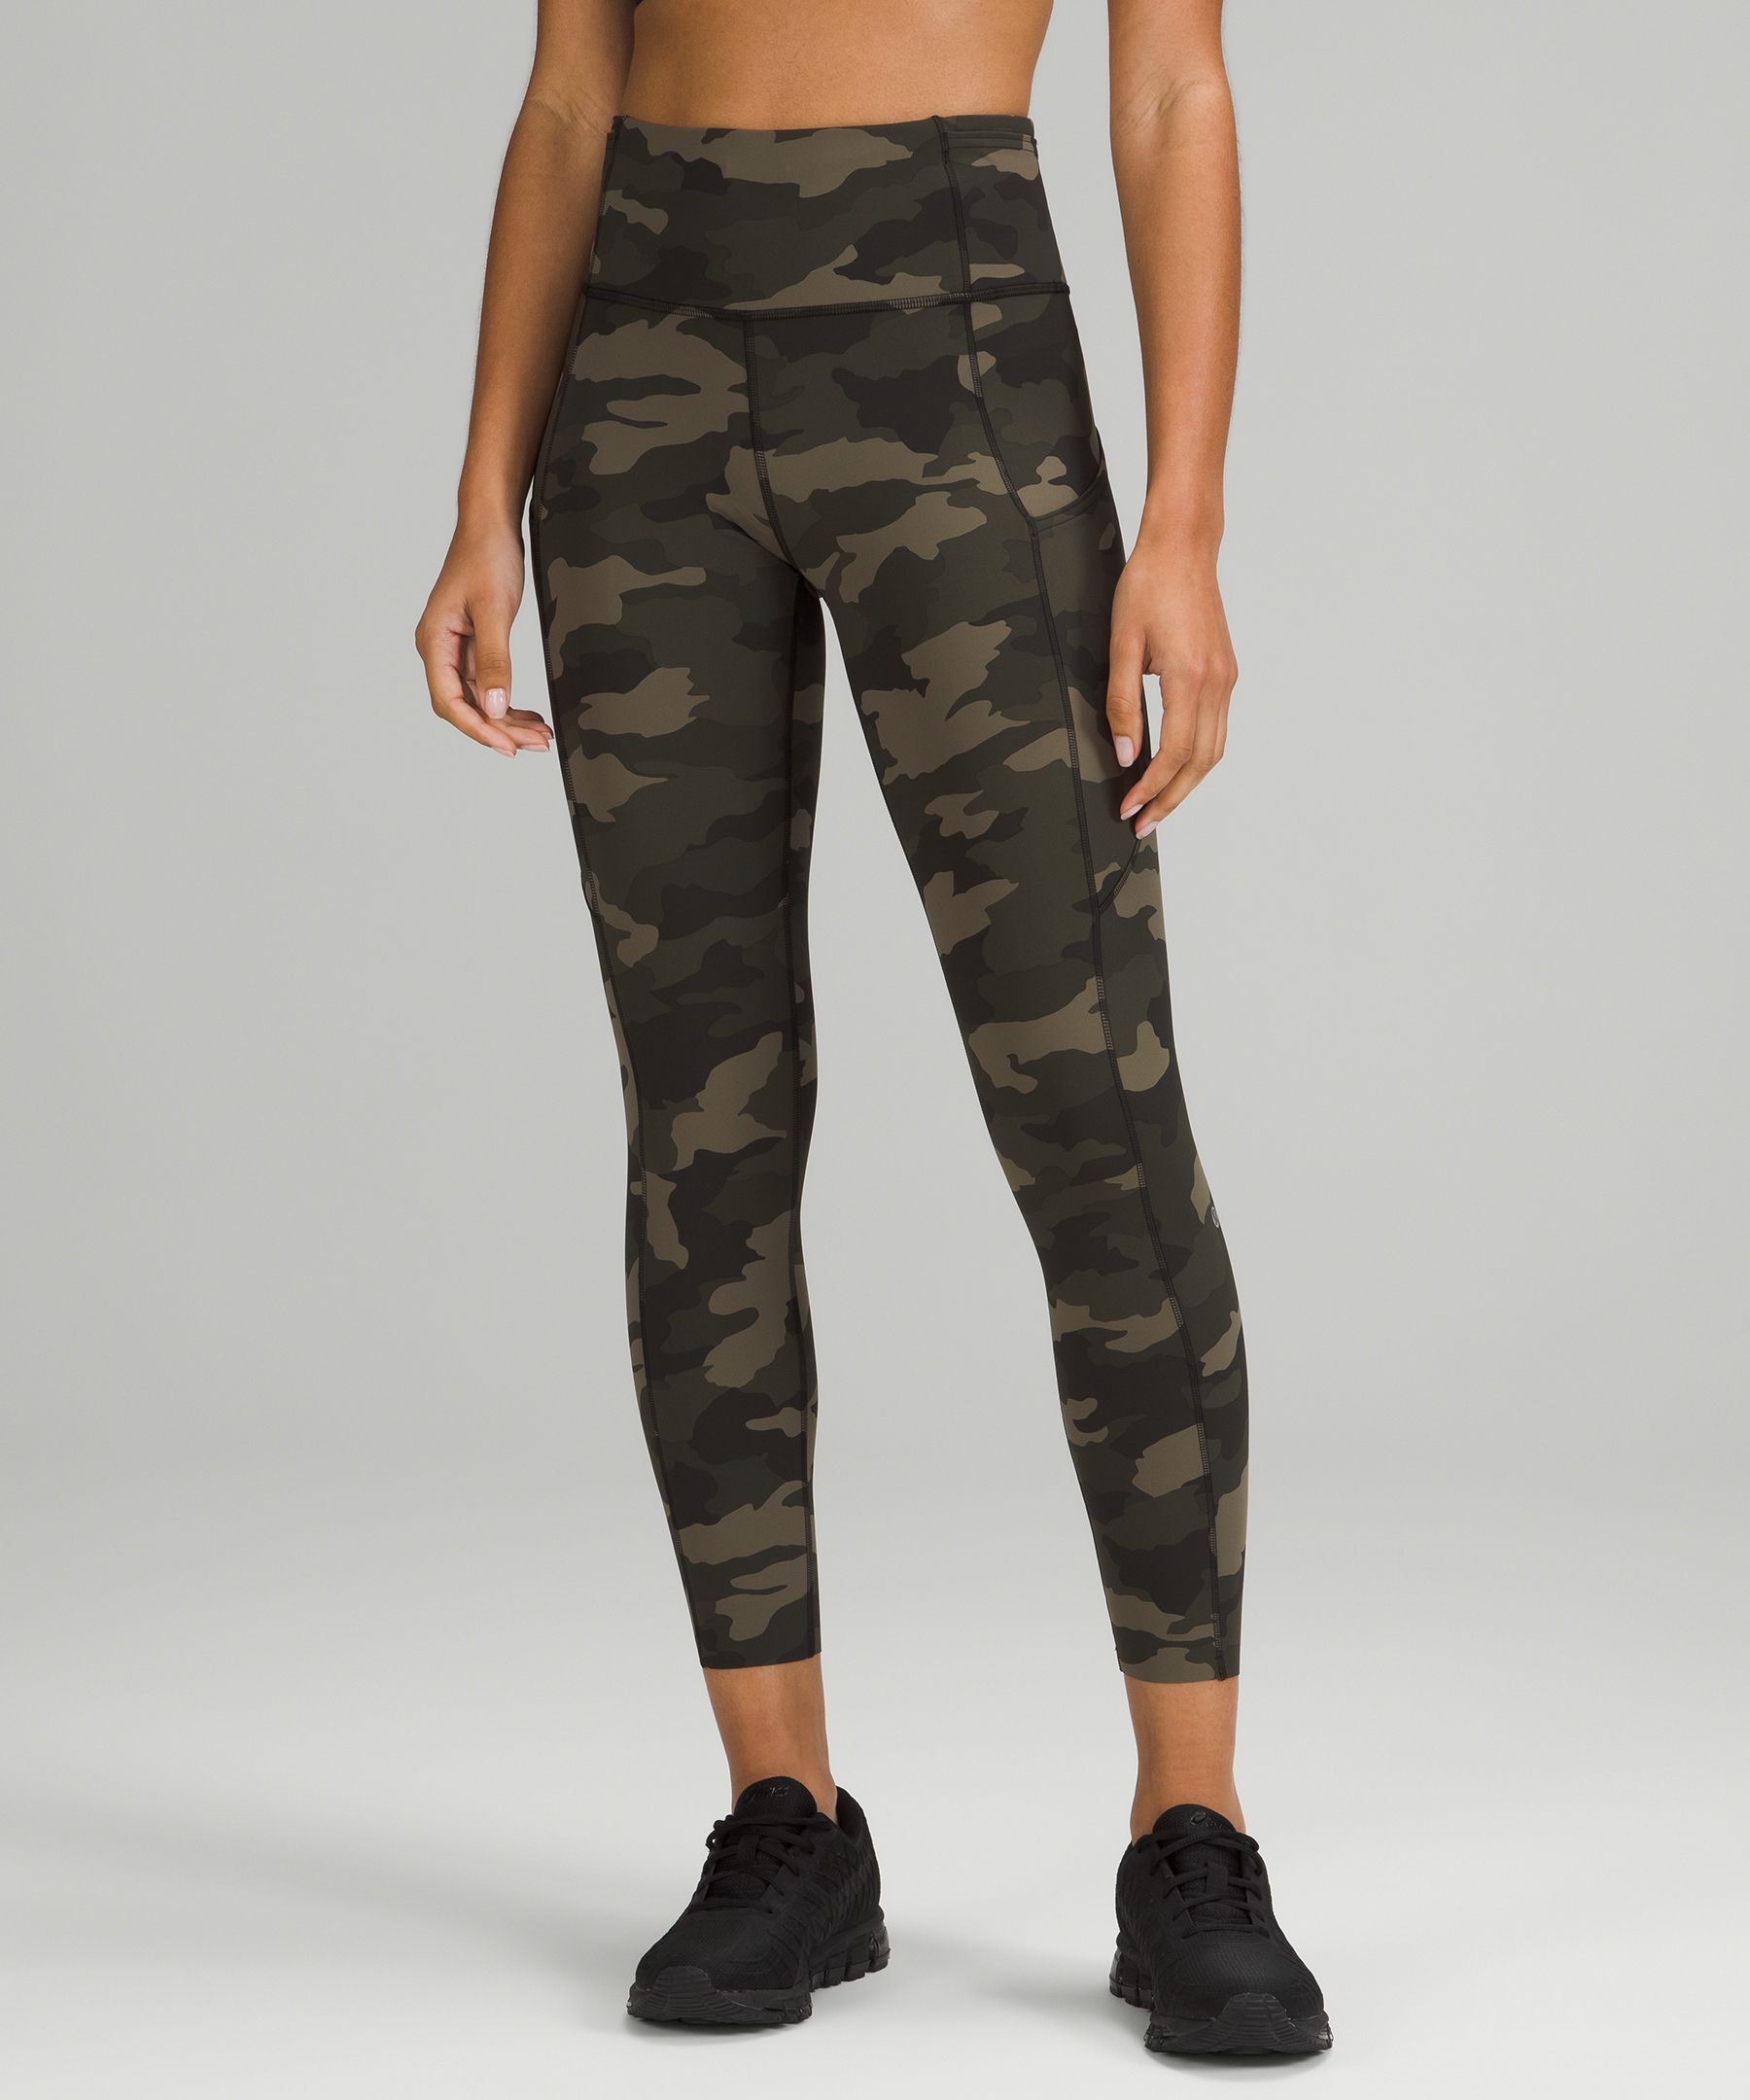 Lululemon Fast and Free Tight 31 *Reflective - Heritage 365 Camo